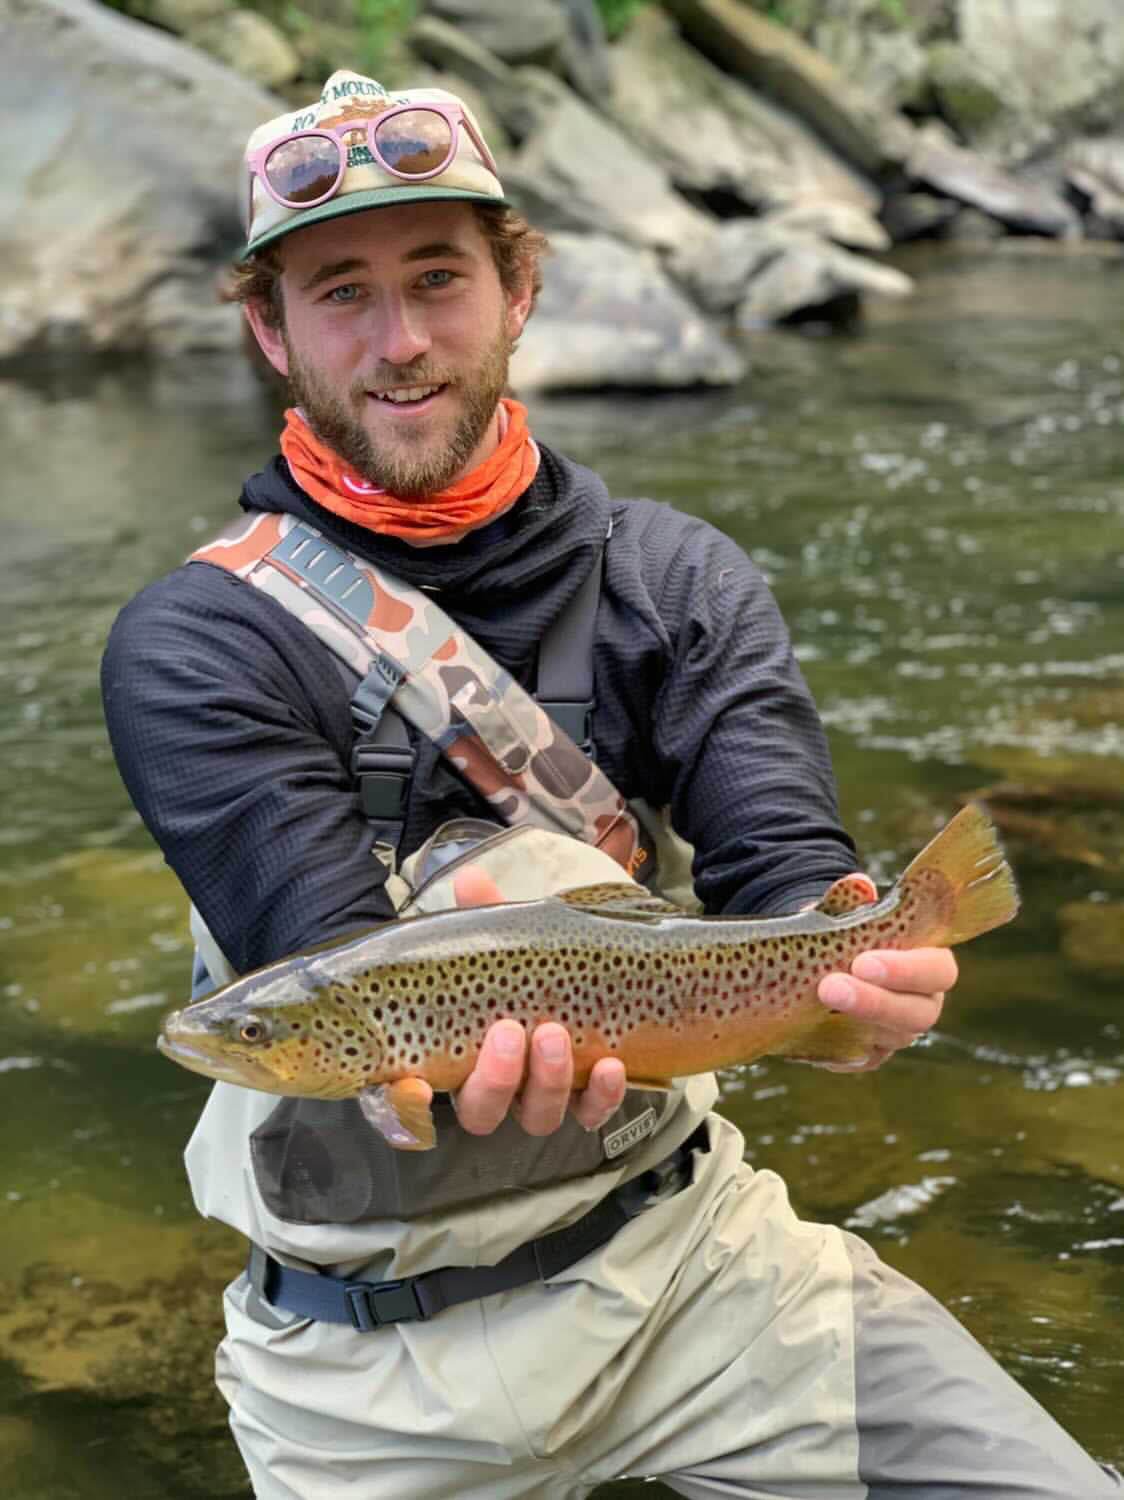 A man wearing a Black Thuja Burrow fleece hoodie, waders and other fishing gear extends a freshly caught brown trout while kneeling in a clear, rocky river.